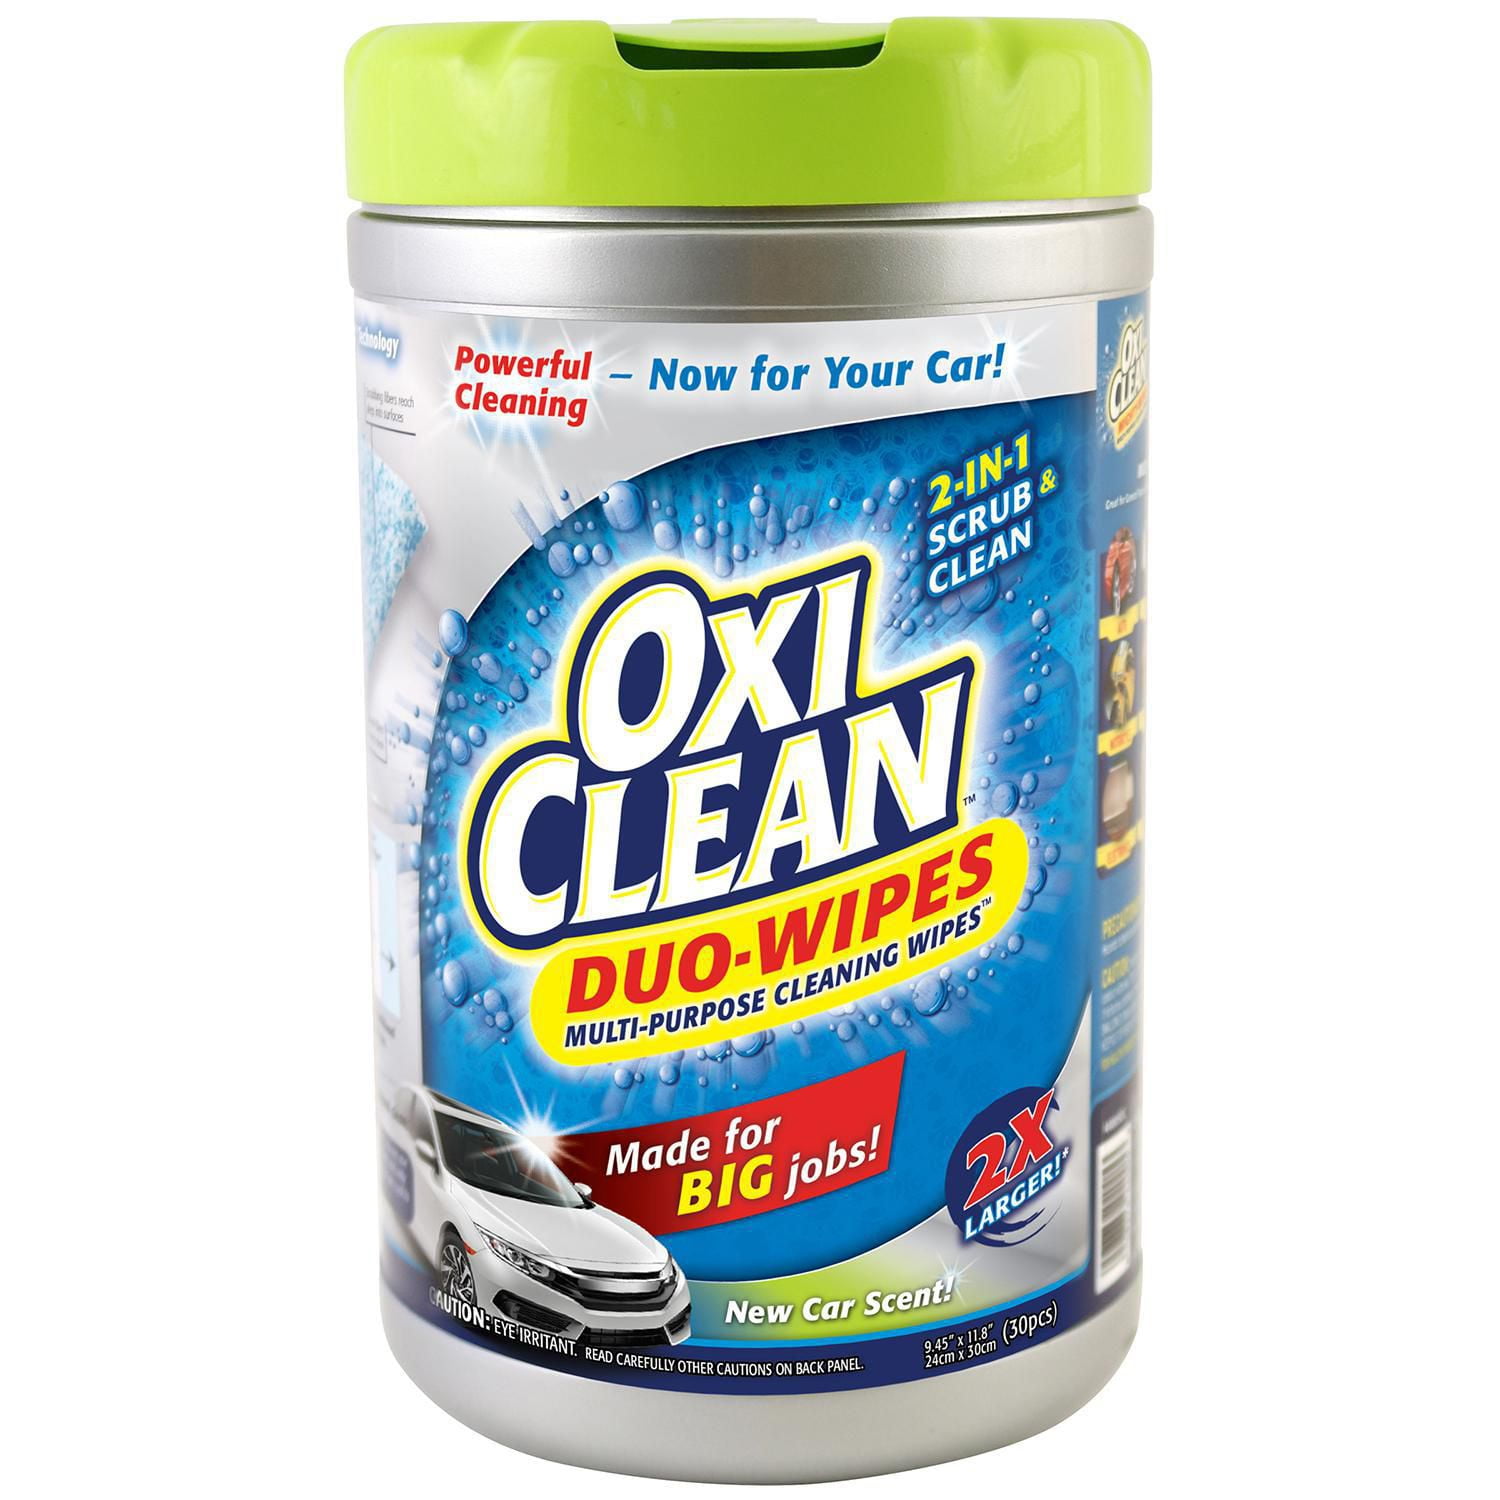 OxiClean Duo-Wipes Multi-Purpose Cleaning Wipes, 30 Count